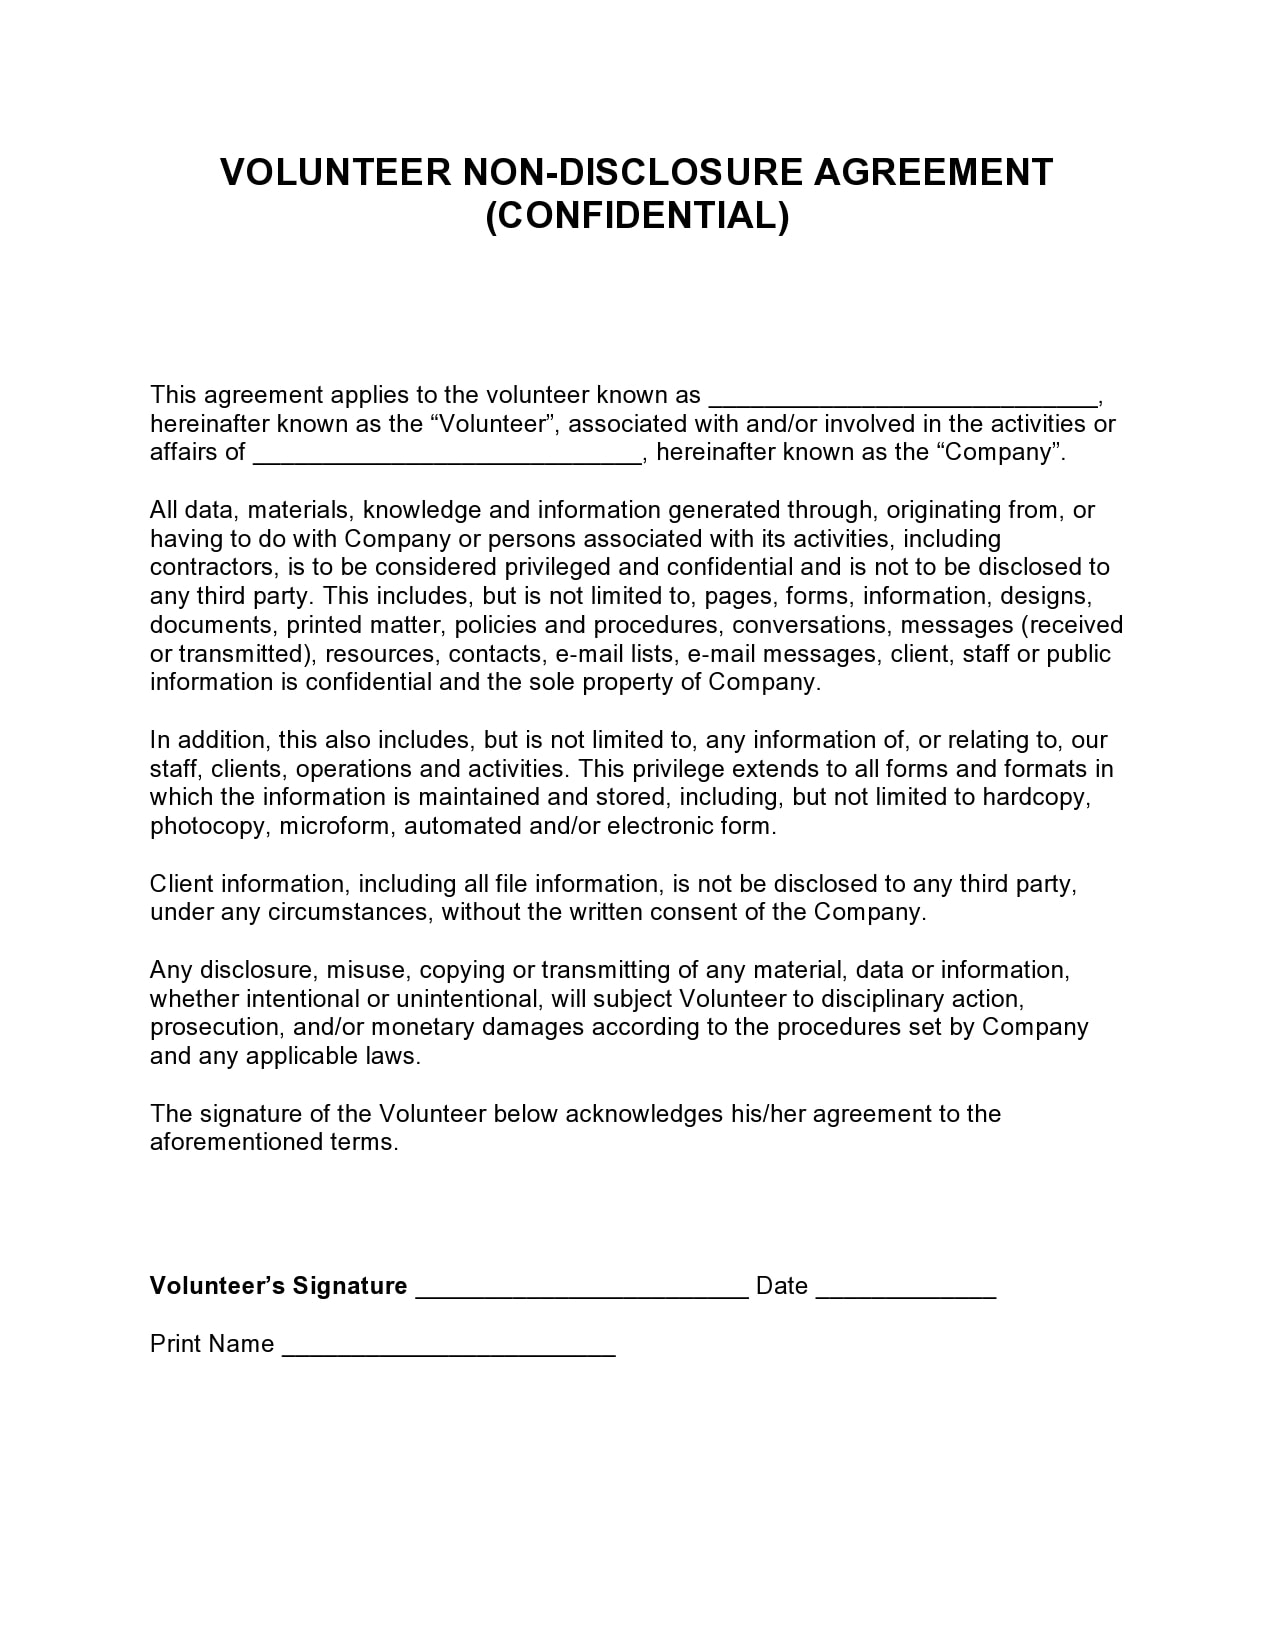 21 Free Confidentiality Agreement Templates (NDA) - TemplateArchive For word employee confidentiality agreement templates